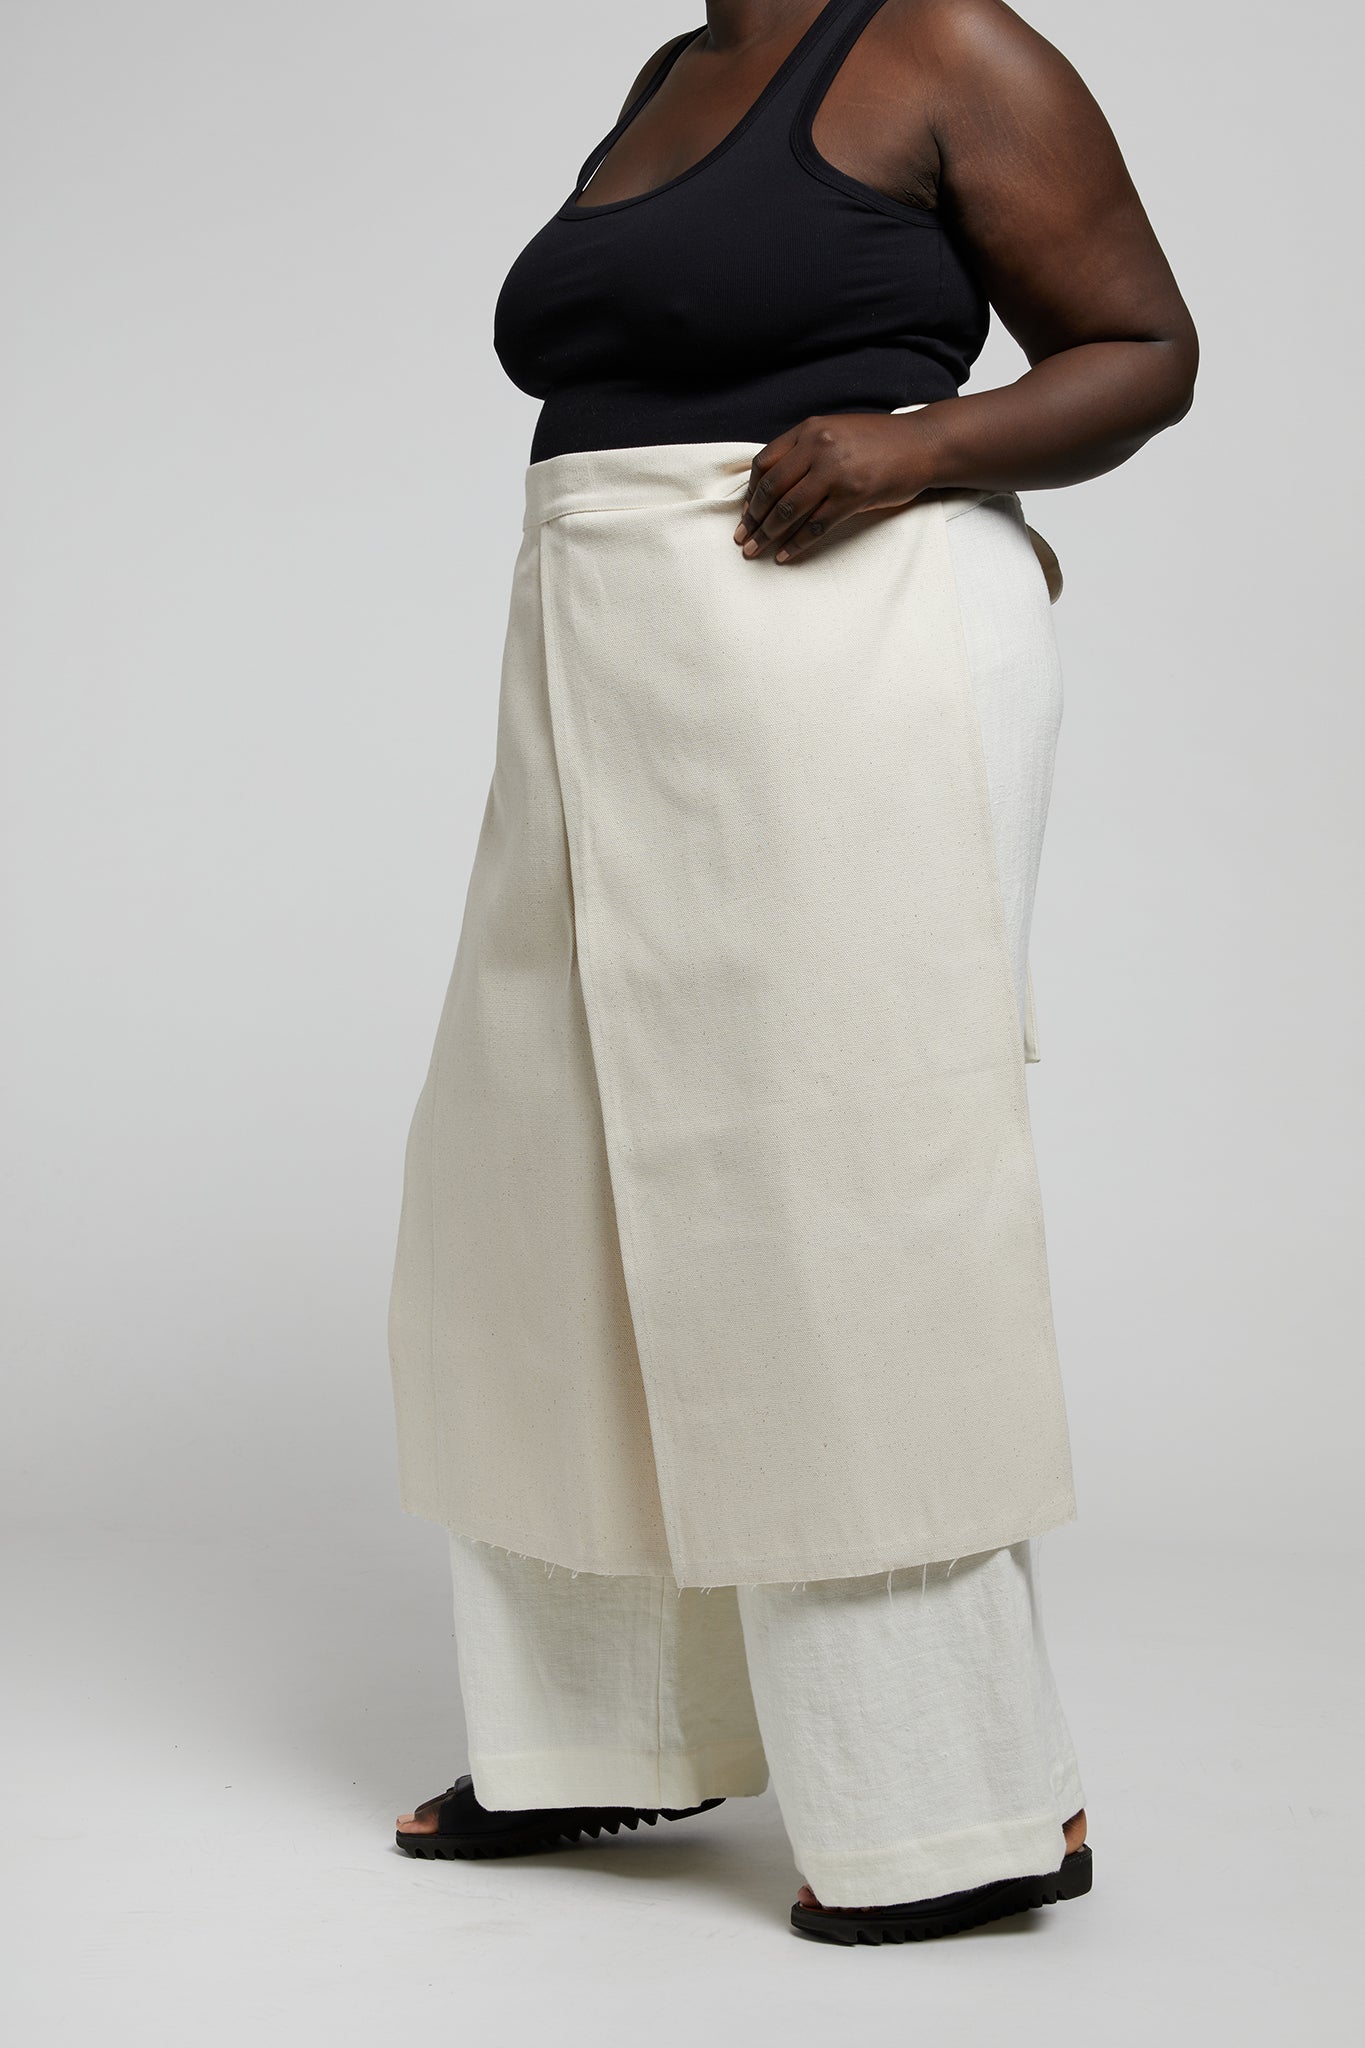 A.61 Undyed Canvas Workshop Apron in Recycled Cotton